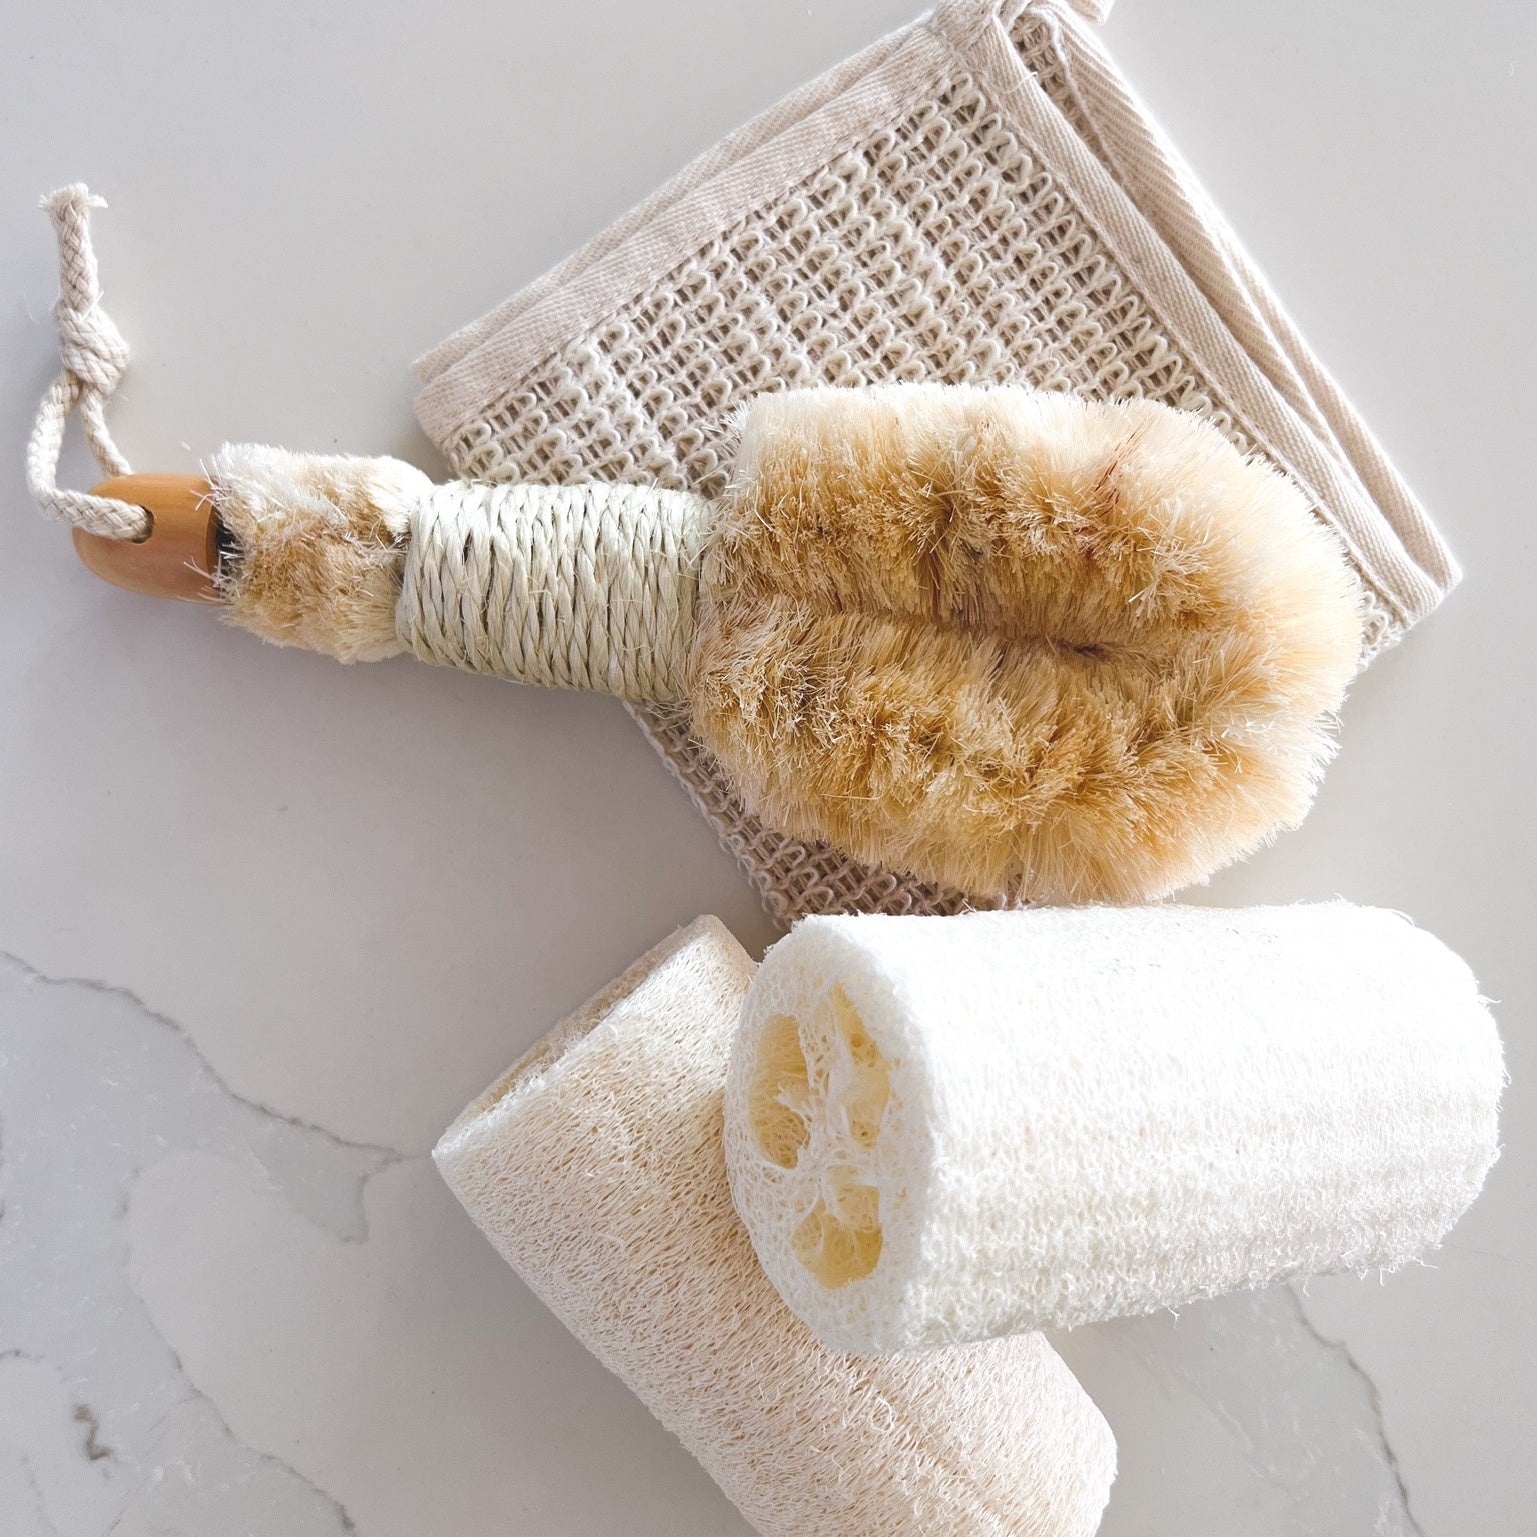 Nordic dry brush pictured with natural loofash and sisal washcloth